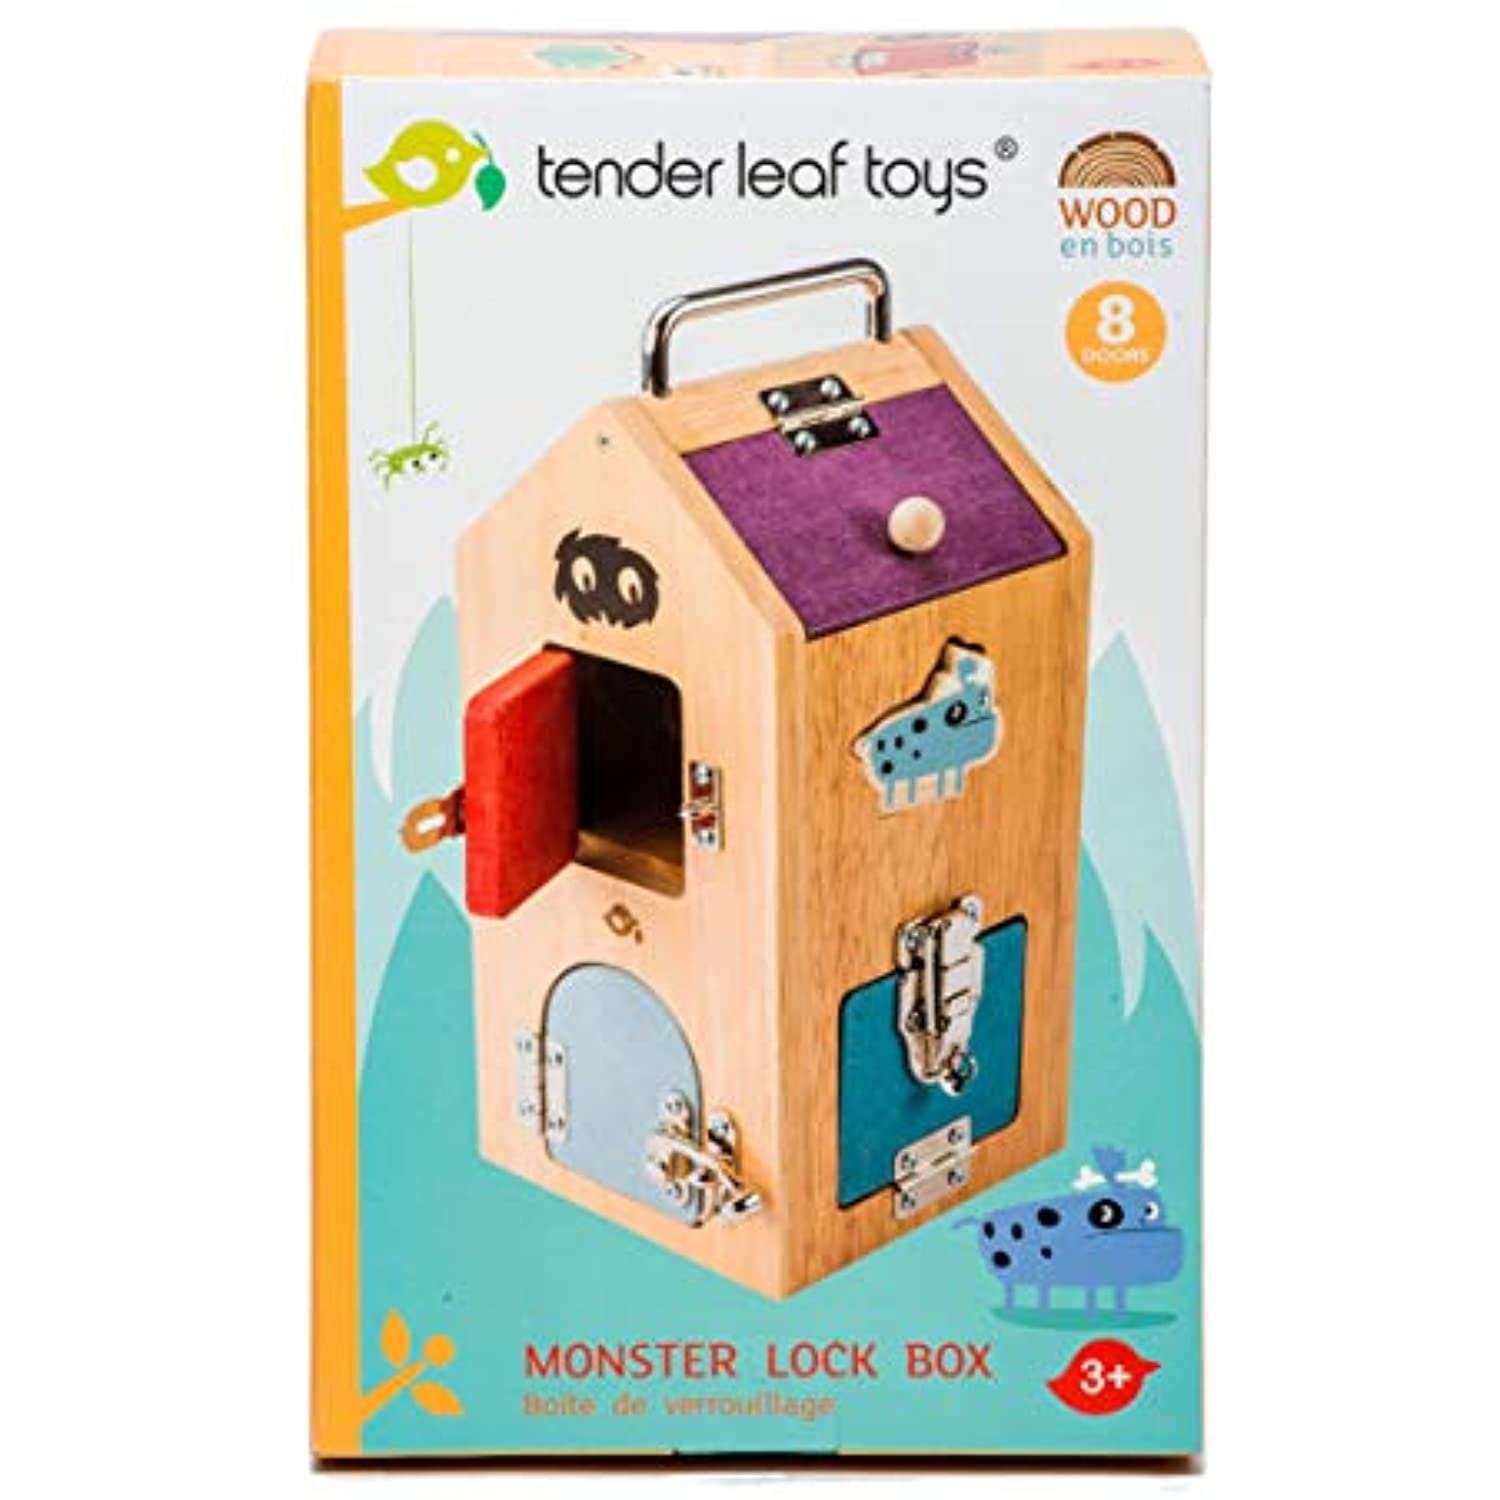 Tender Leaf Toys Wooden Monster Lock Box - 8 Different Doors with Various Lock Mechanisms Helps Develop Probelm Solving Skills - 3 +, Multicolor, 6.5" x 6.7" x 11.7" - image 3 of 6